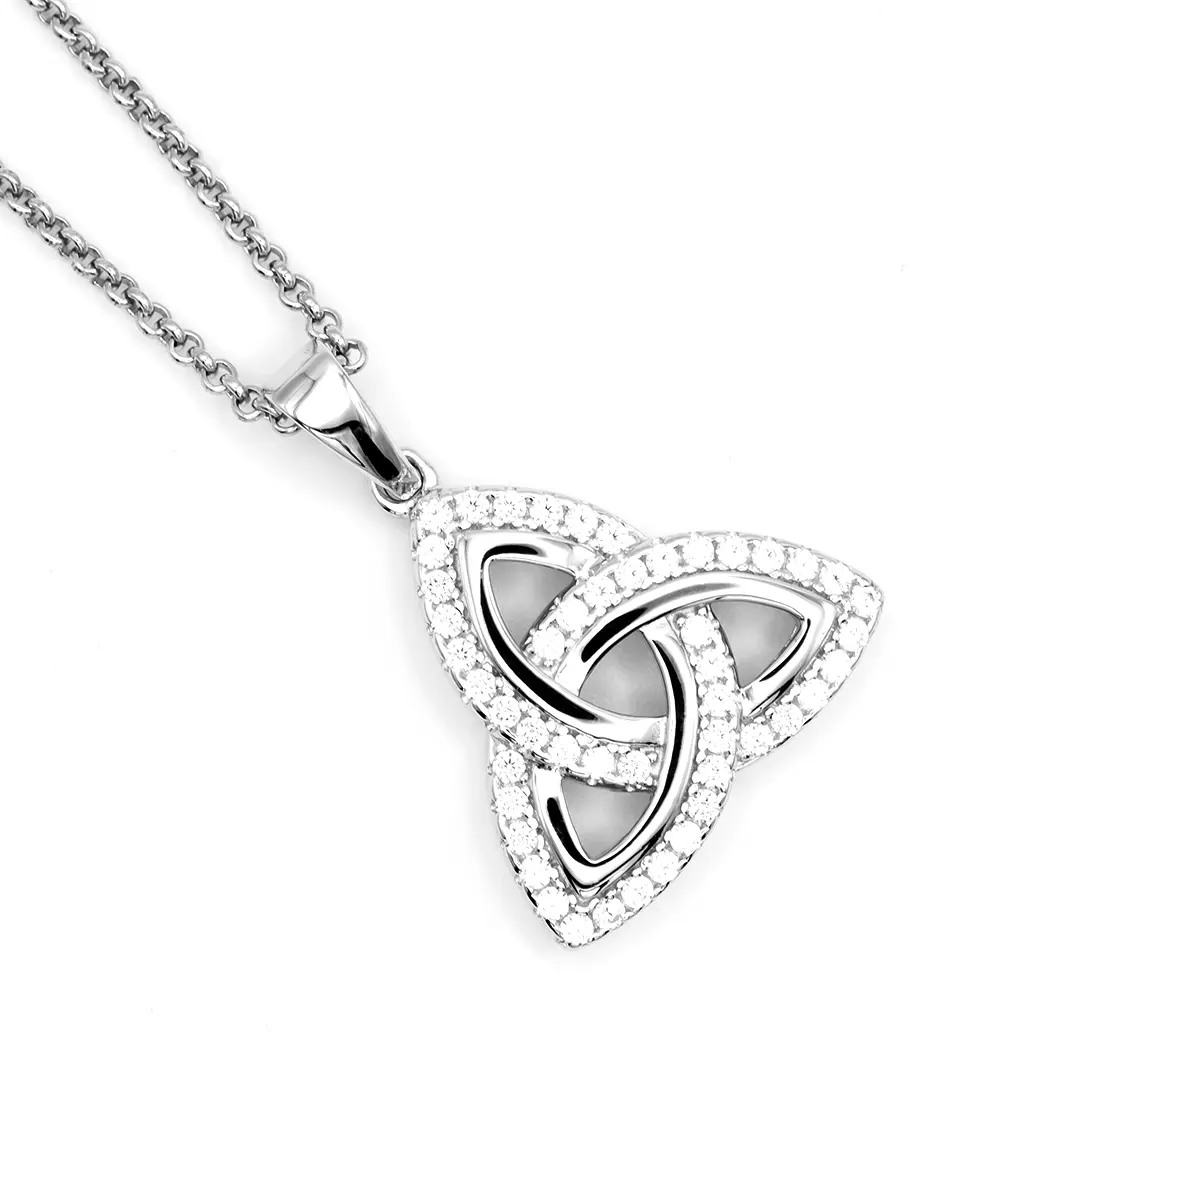 Sterling Silver Trinity Knot Pendant Inlaid With Cubic Zirconia Gemstones 9...